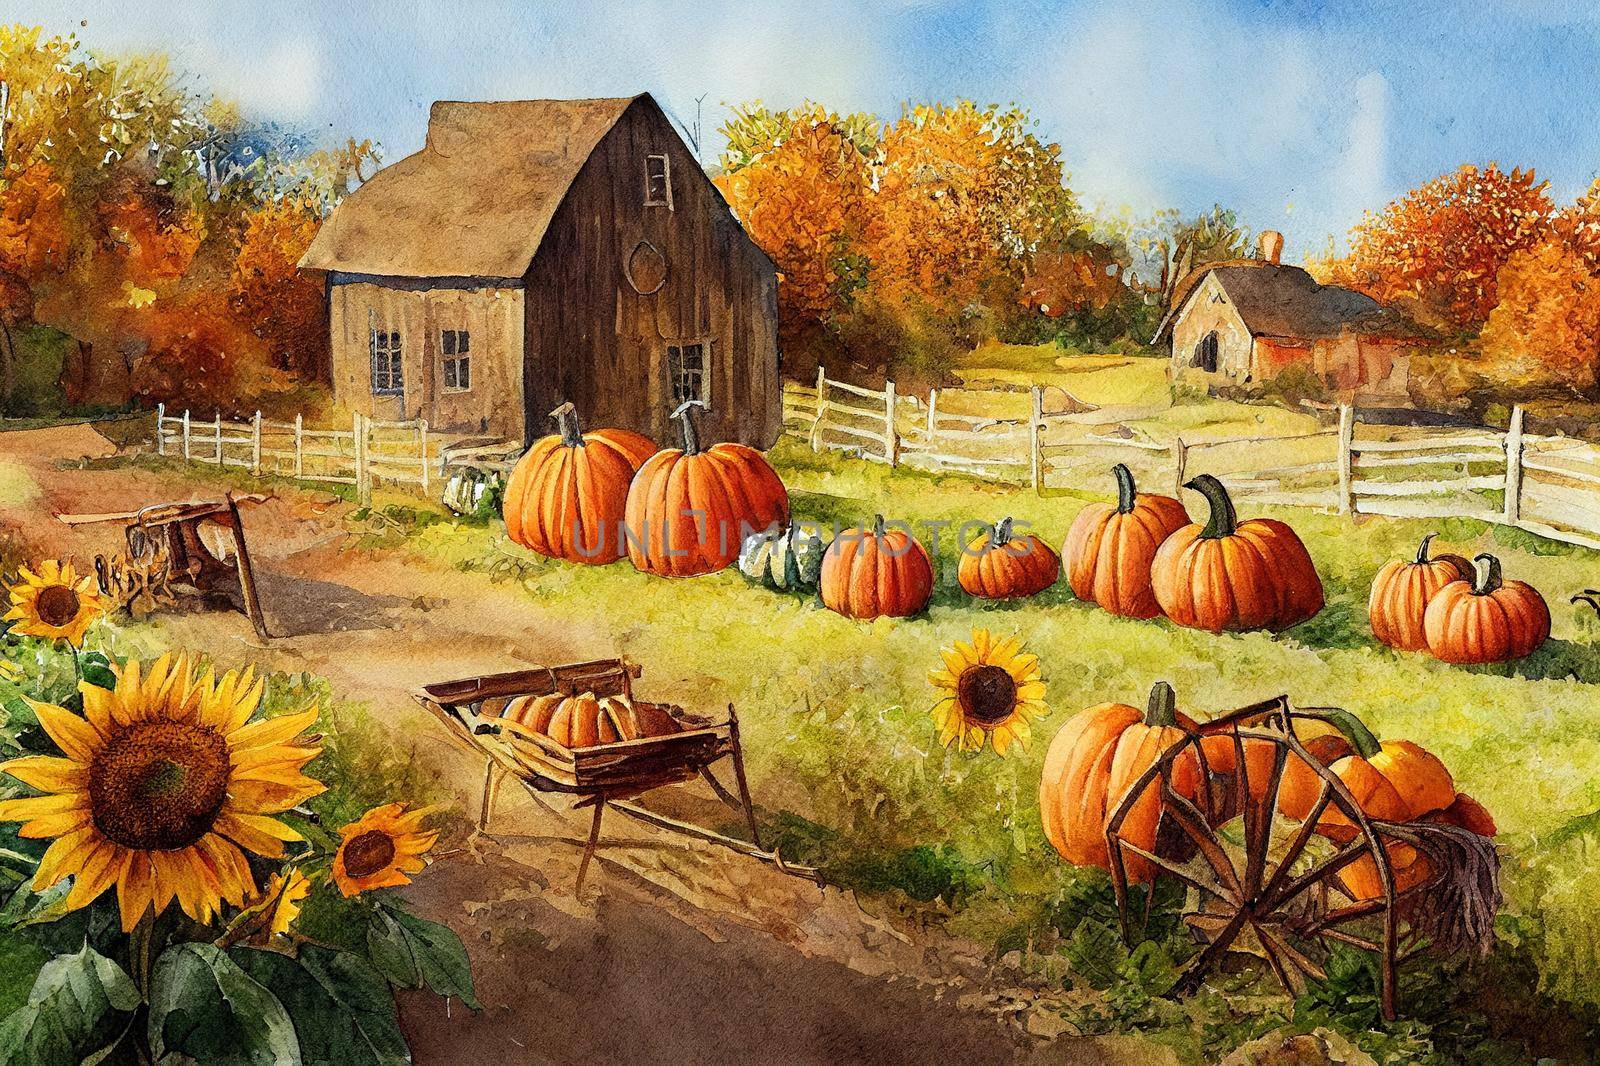 Watercolor farmhouse illustration, Autumn harvest scene with rustic wheelbarrow, pumpkin, sunflowers, hay, pumpkin patch. Thanksgiving fall background, country graphics.